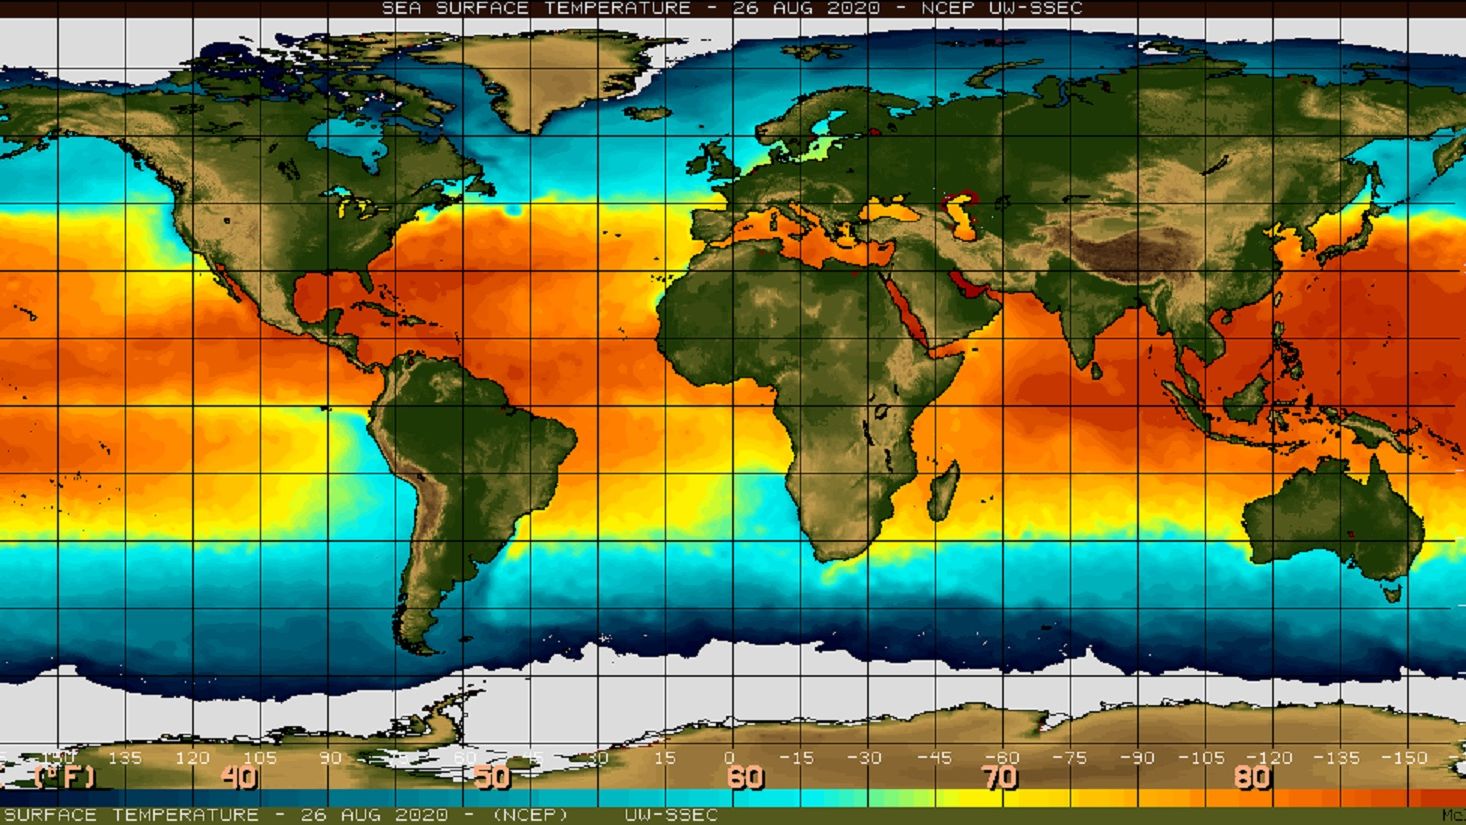 Sea surface temperatures on Wednesday, August 26, 2020.